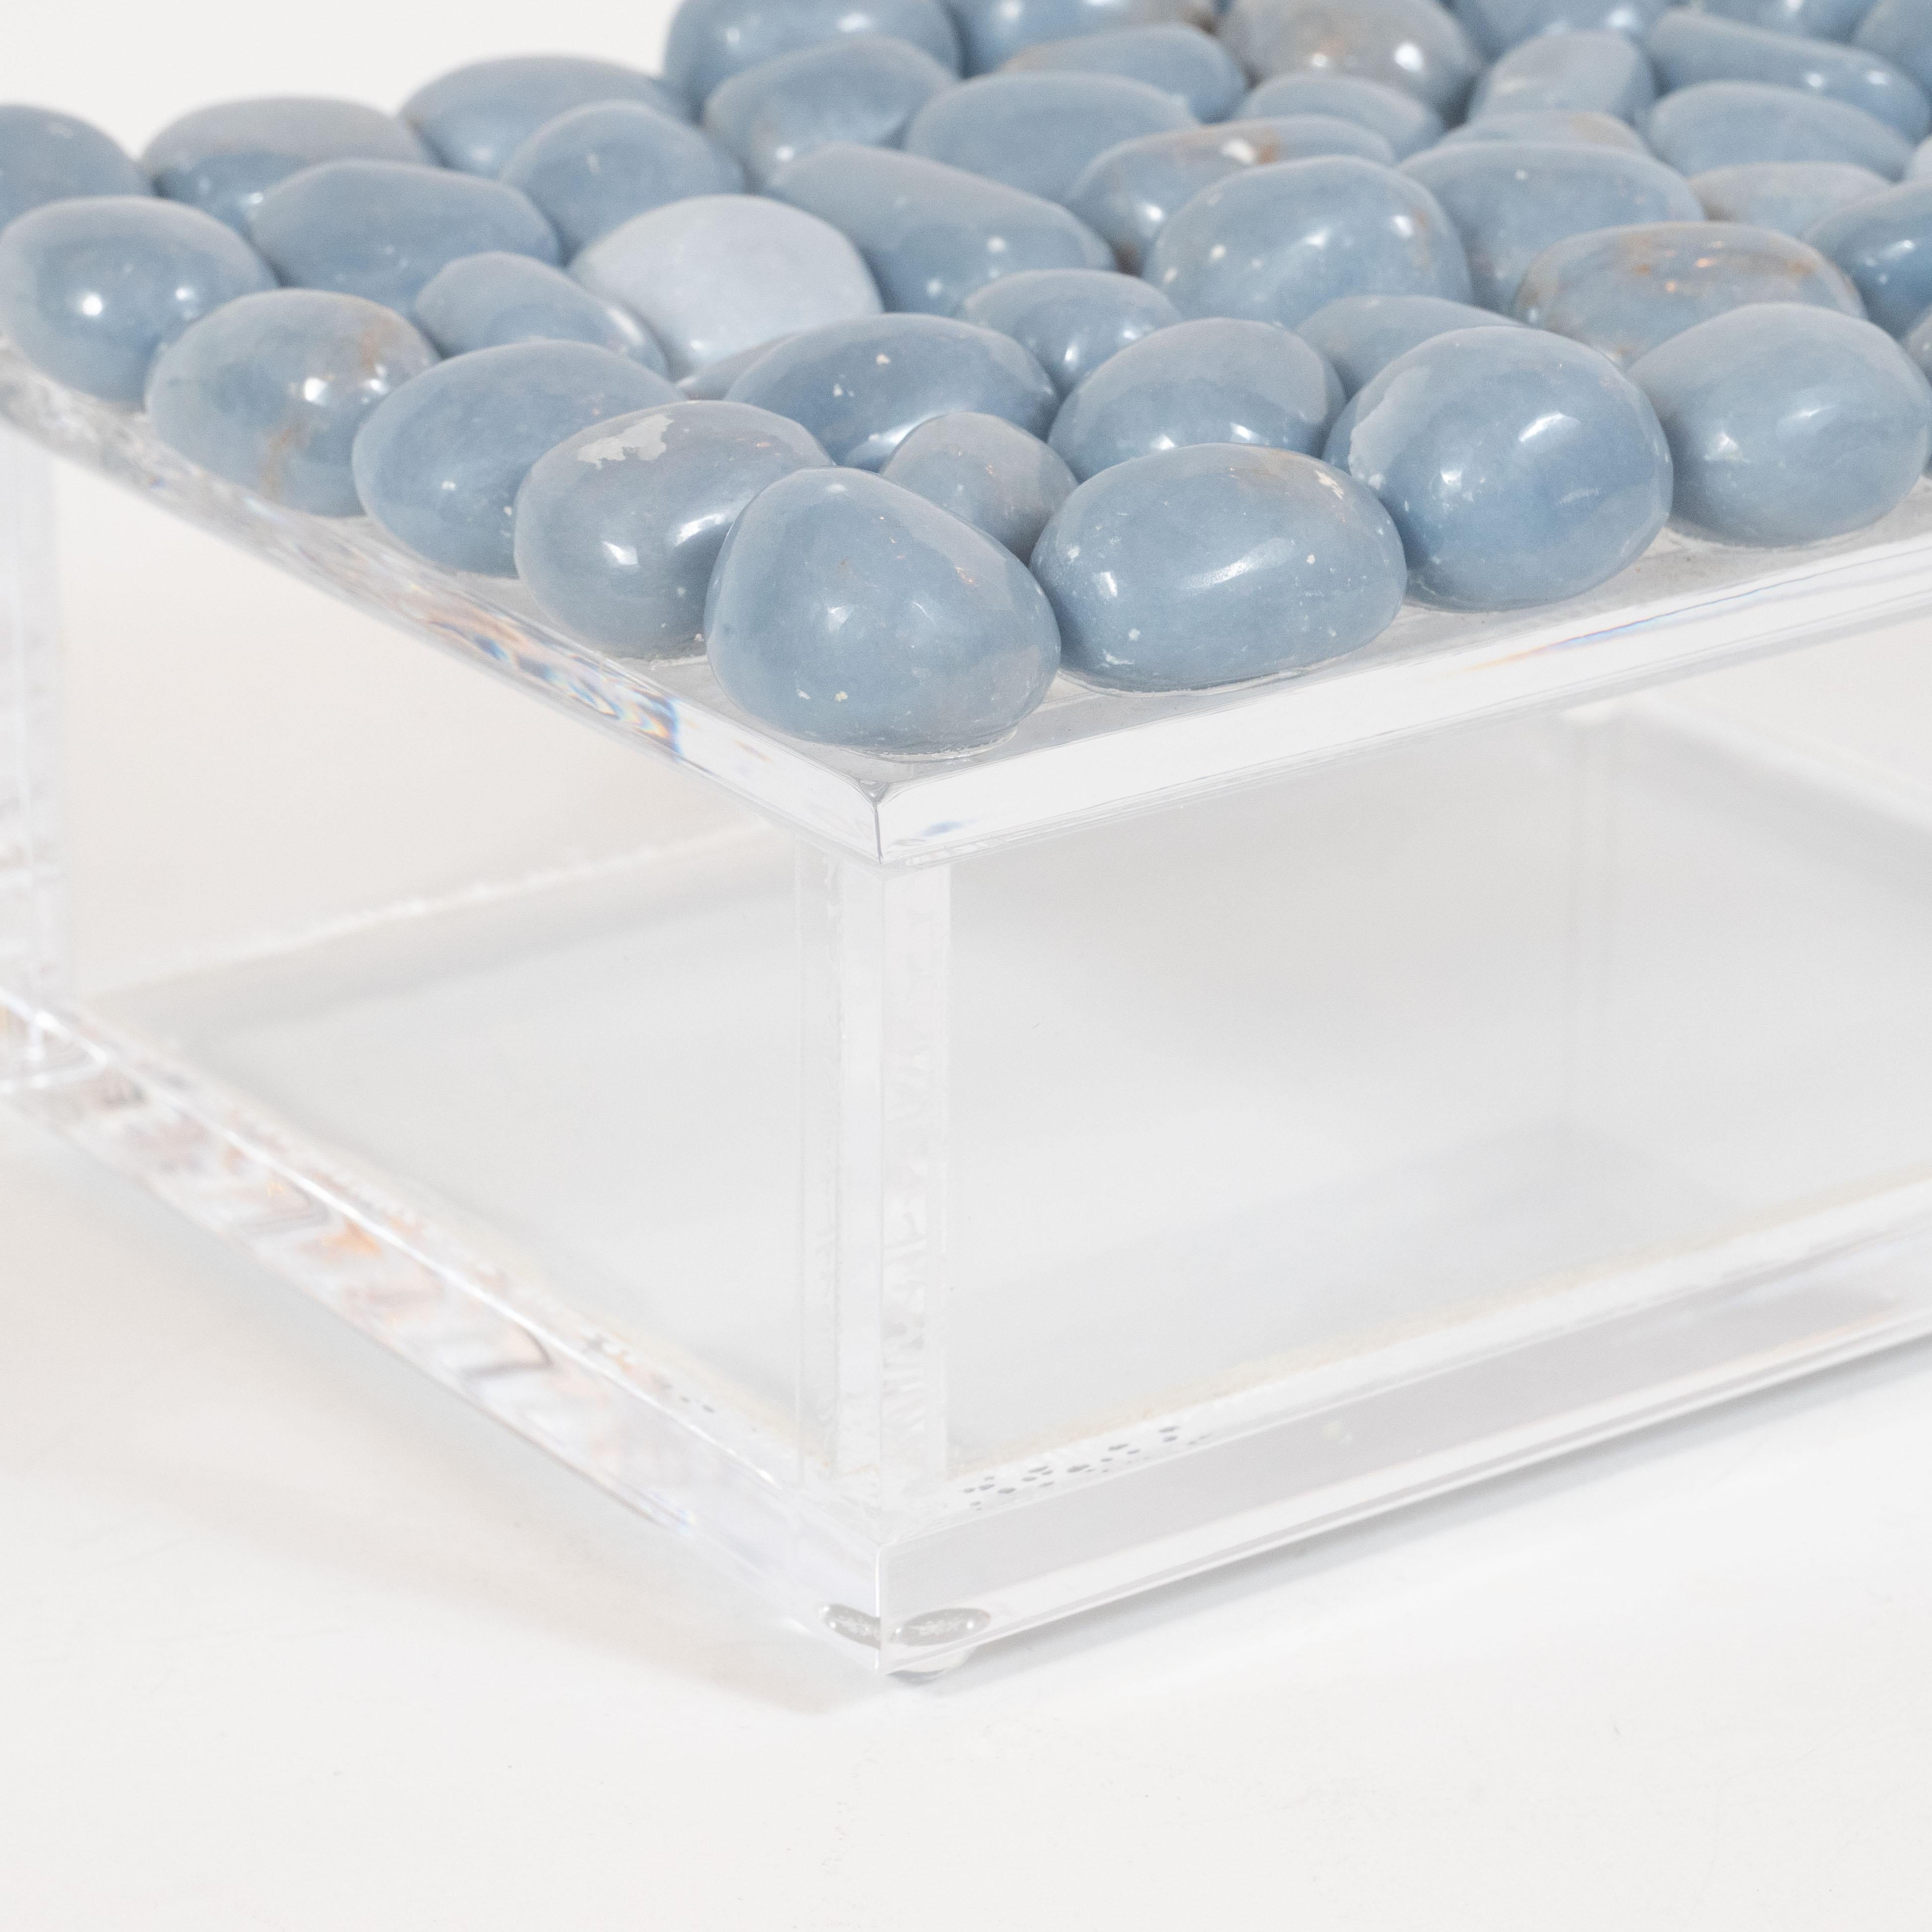 This elegant and unusual features a volumetric rectangular body sitting on orbital feet all realized in clear Lucite. The Lucite top of the box is decorated with a wealth of polished organically formed stones in a muted grayish blue tone, offering a